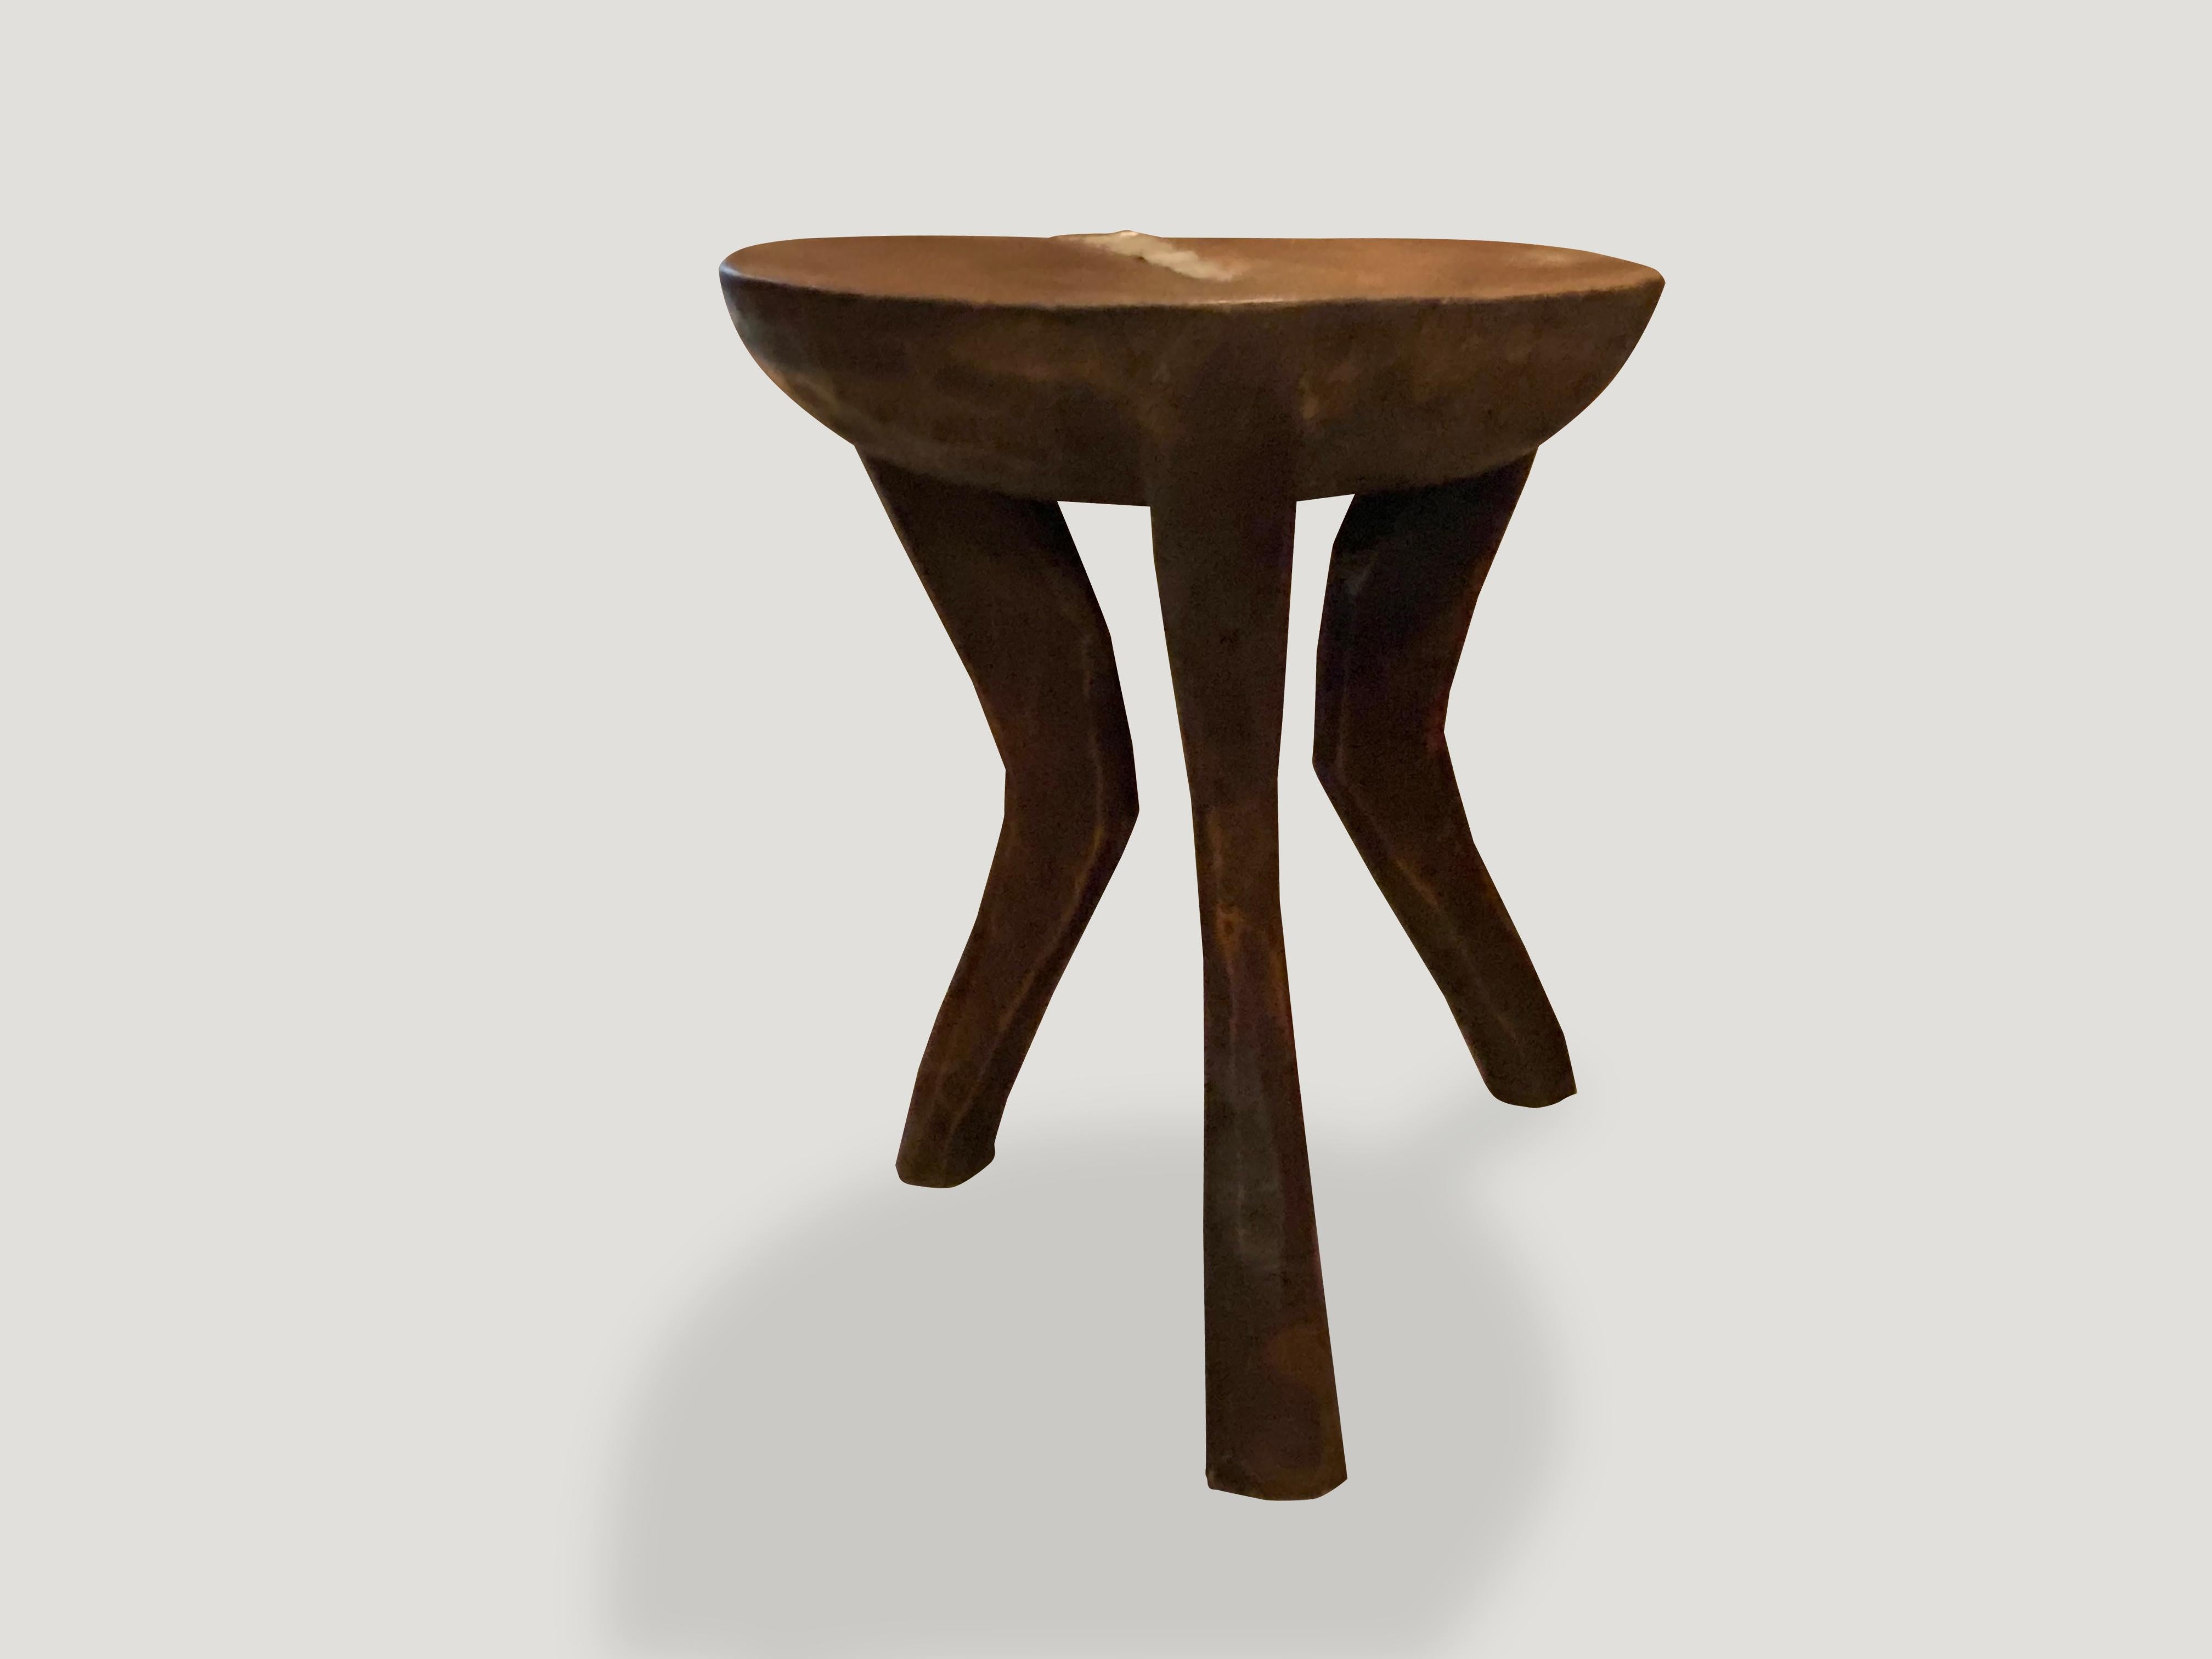 Tribal Andrianna Shamaris Antique African Mahogany Wood Sculptural Side Table